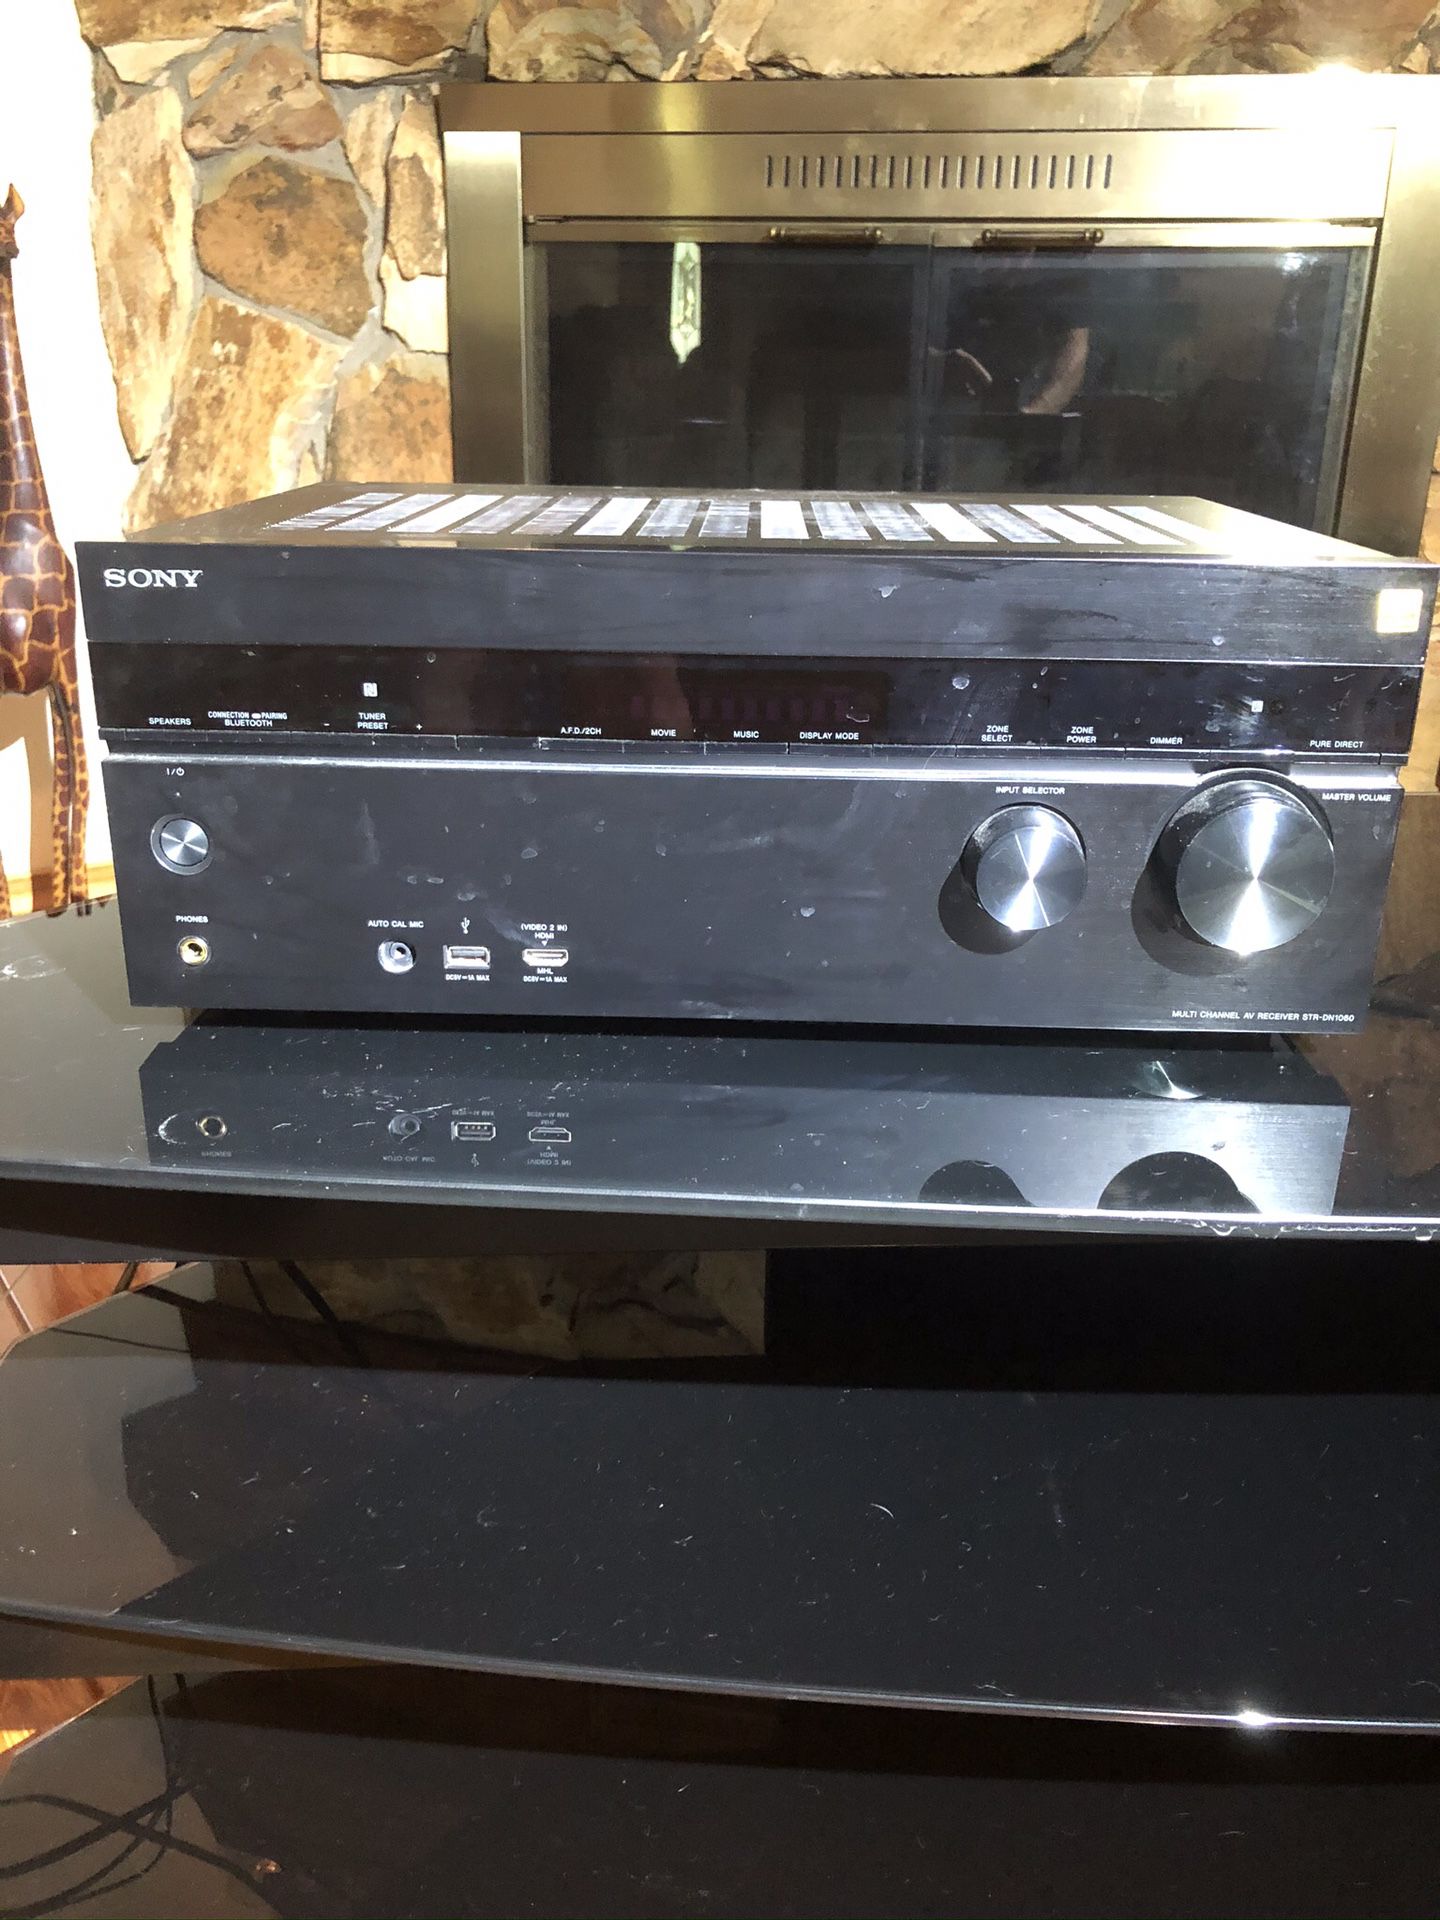 Sony receiver model srtdn1060 like new Sells on Amazon for $400 Works perfect